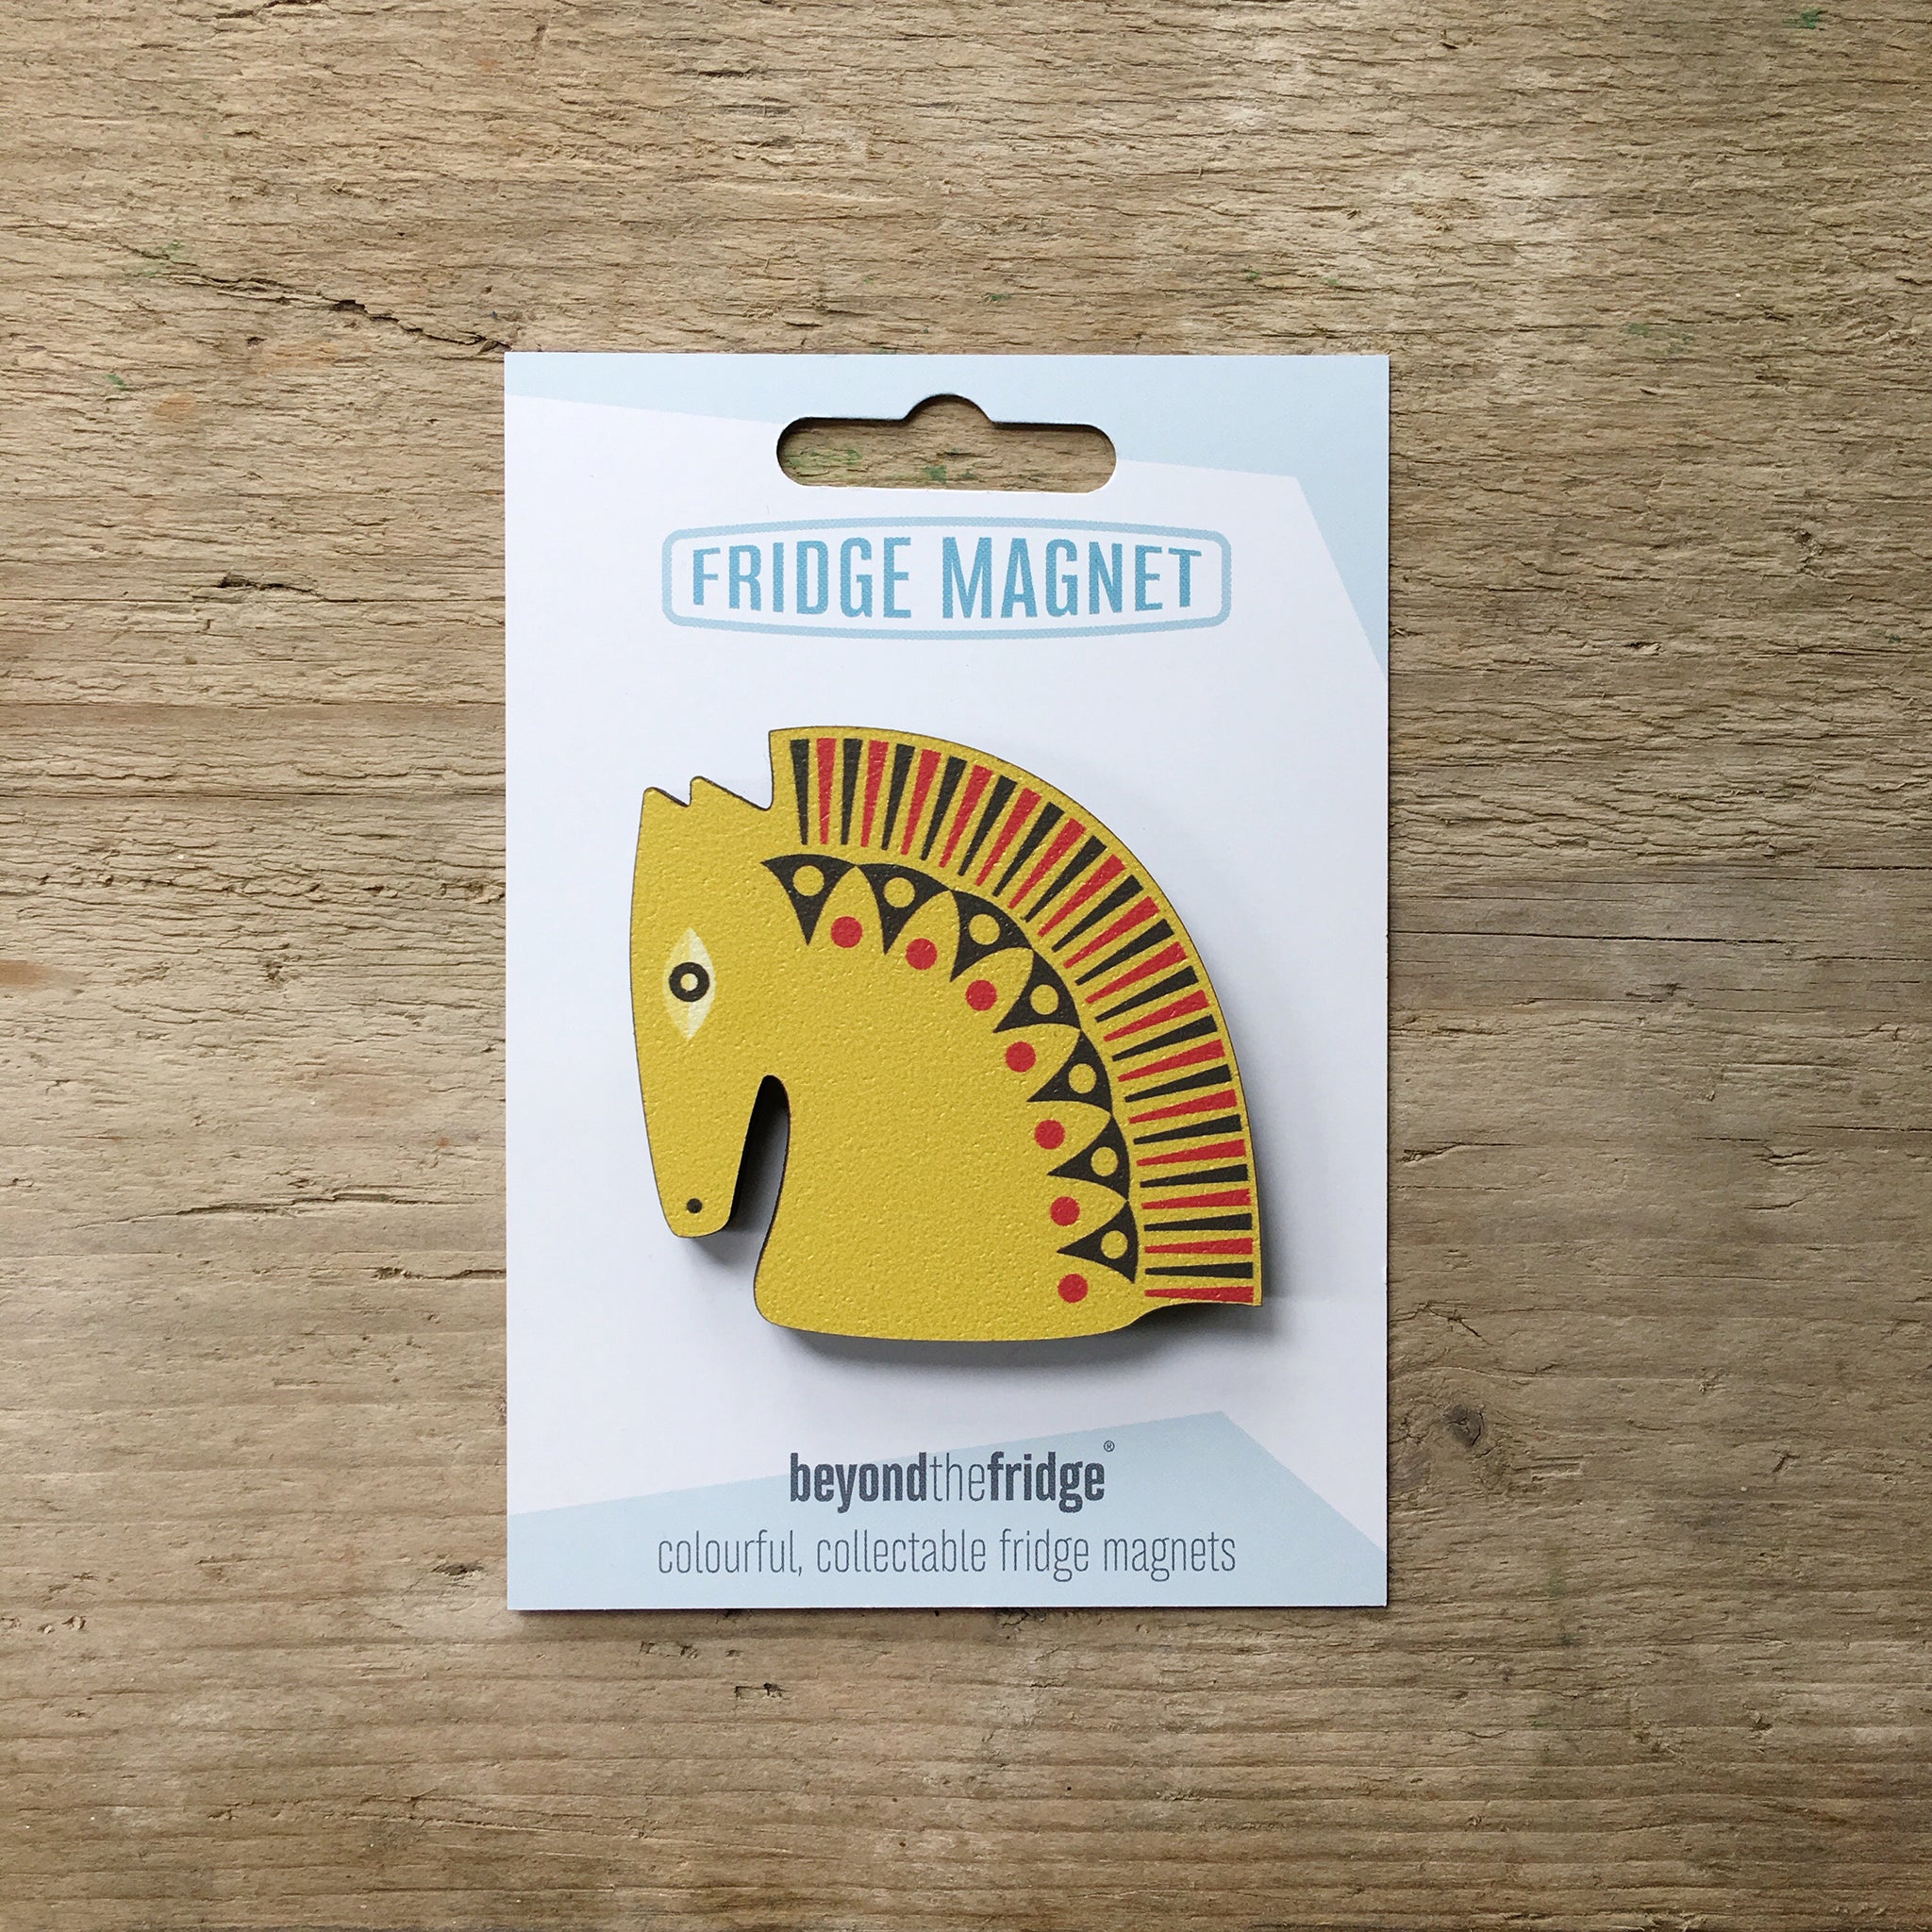 A mustard horse head design plywood fridge magnet by Beyond the Fridge in it’s pack on a wooden background